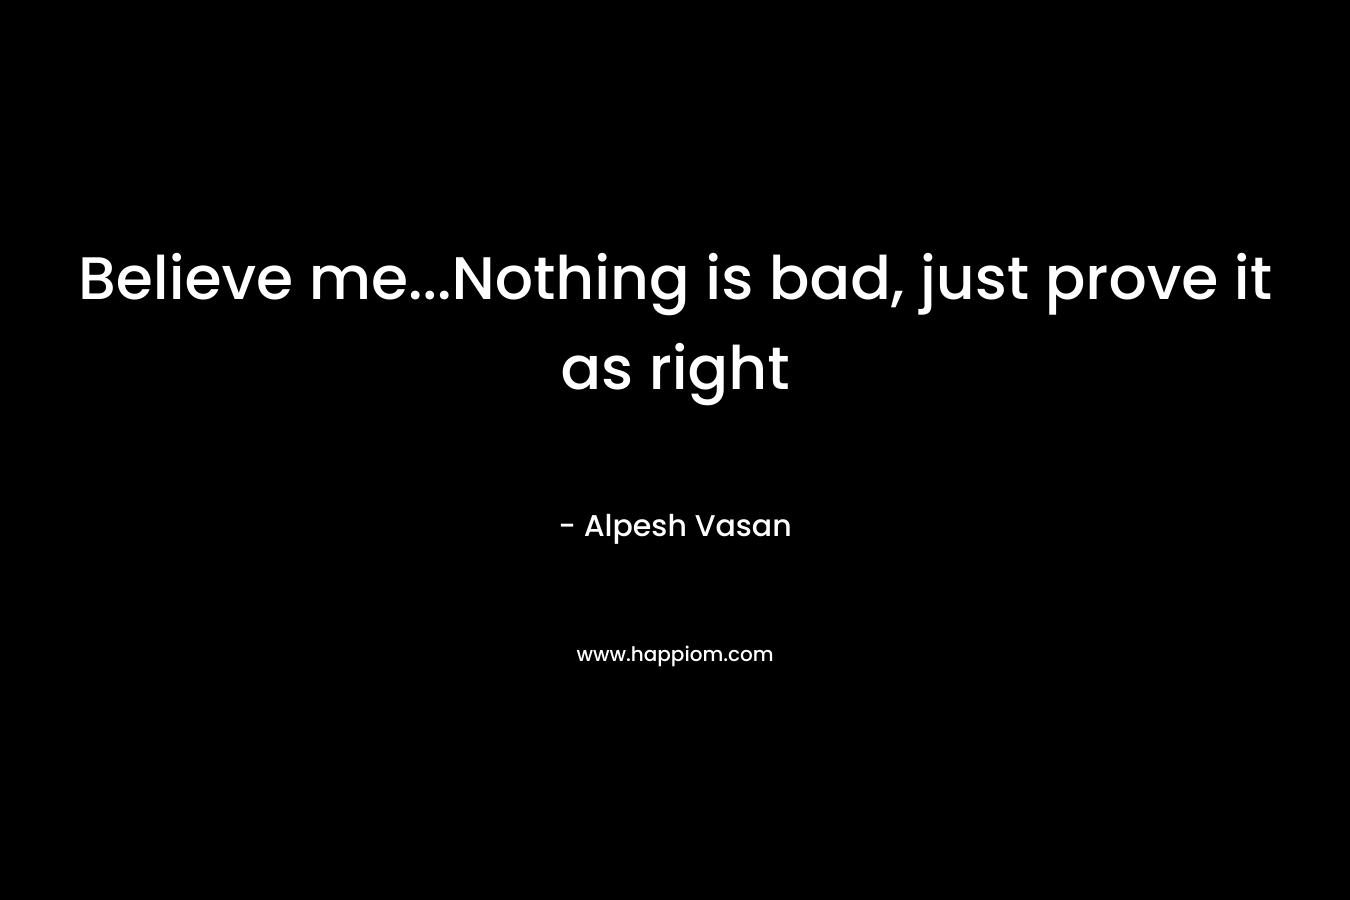 Believe me...Nothing is bad, just prove it as right